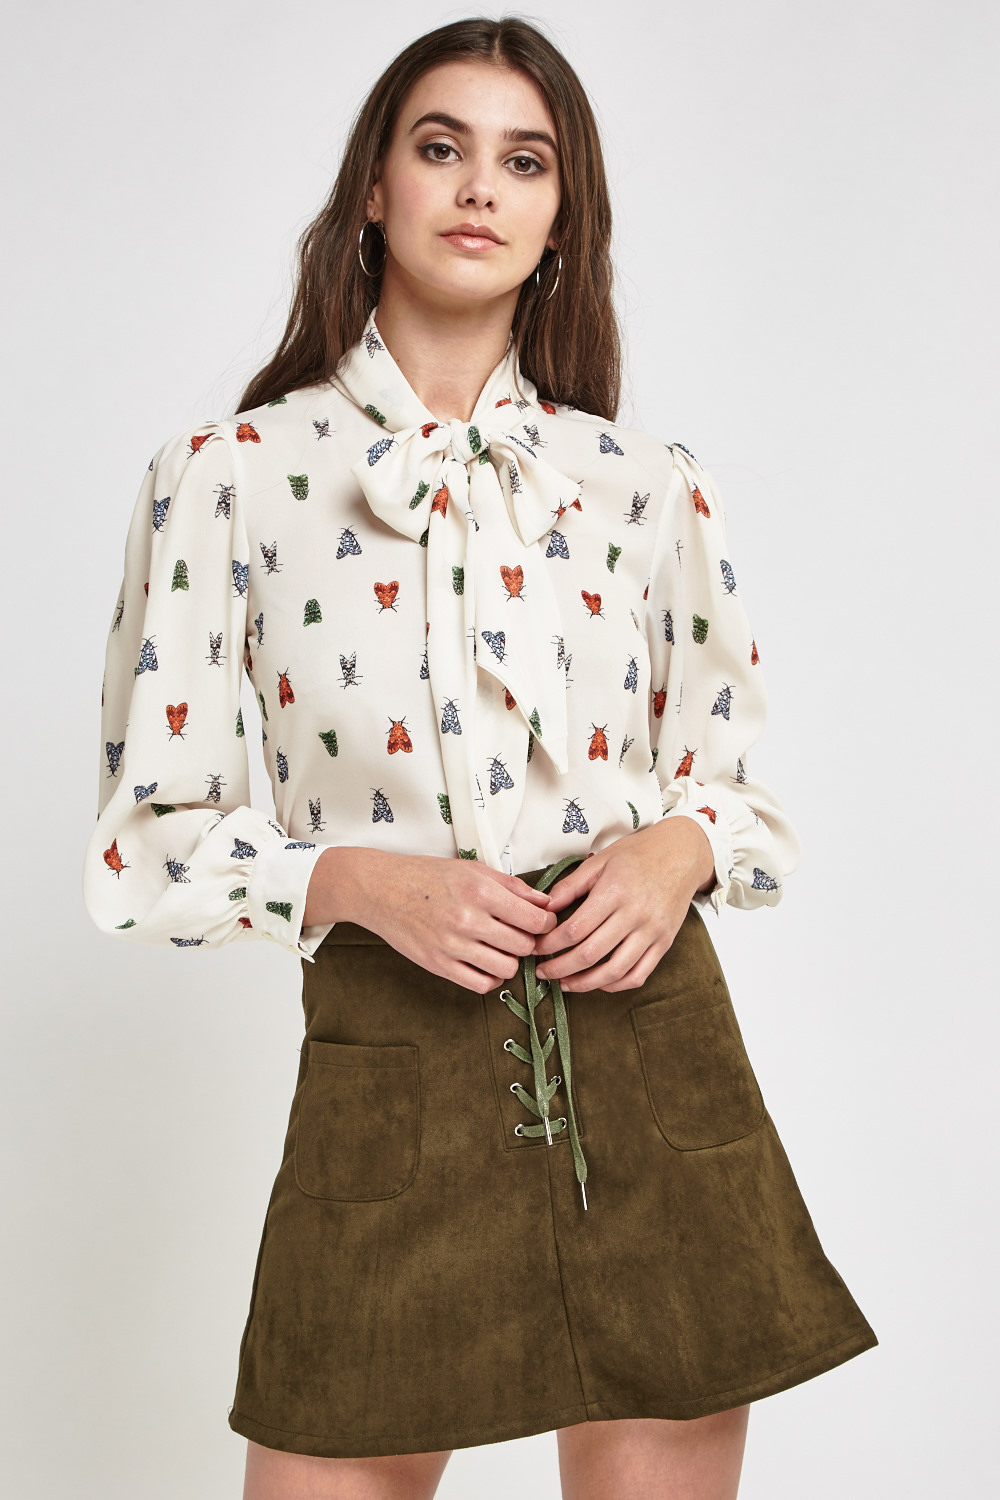 Butterfly Print Tie-Up Neck Blouse - Just $7